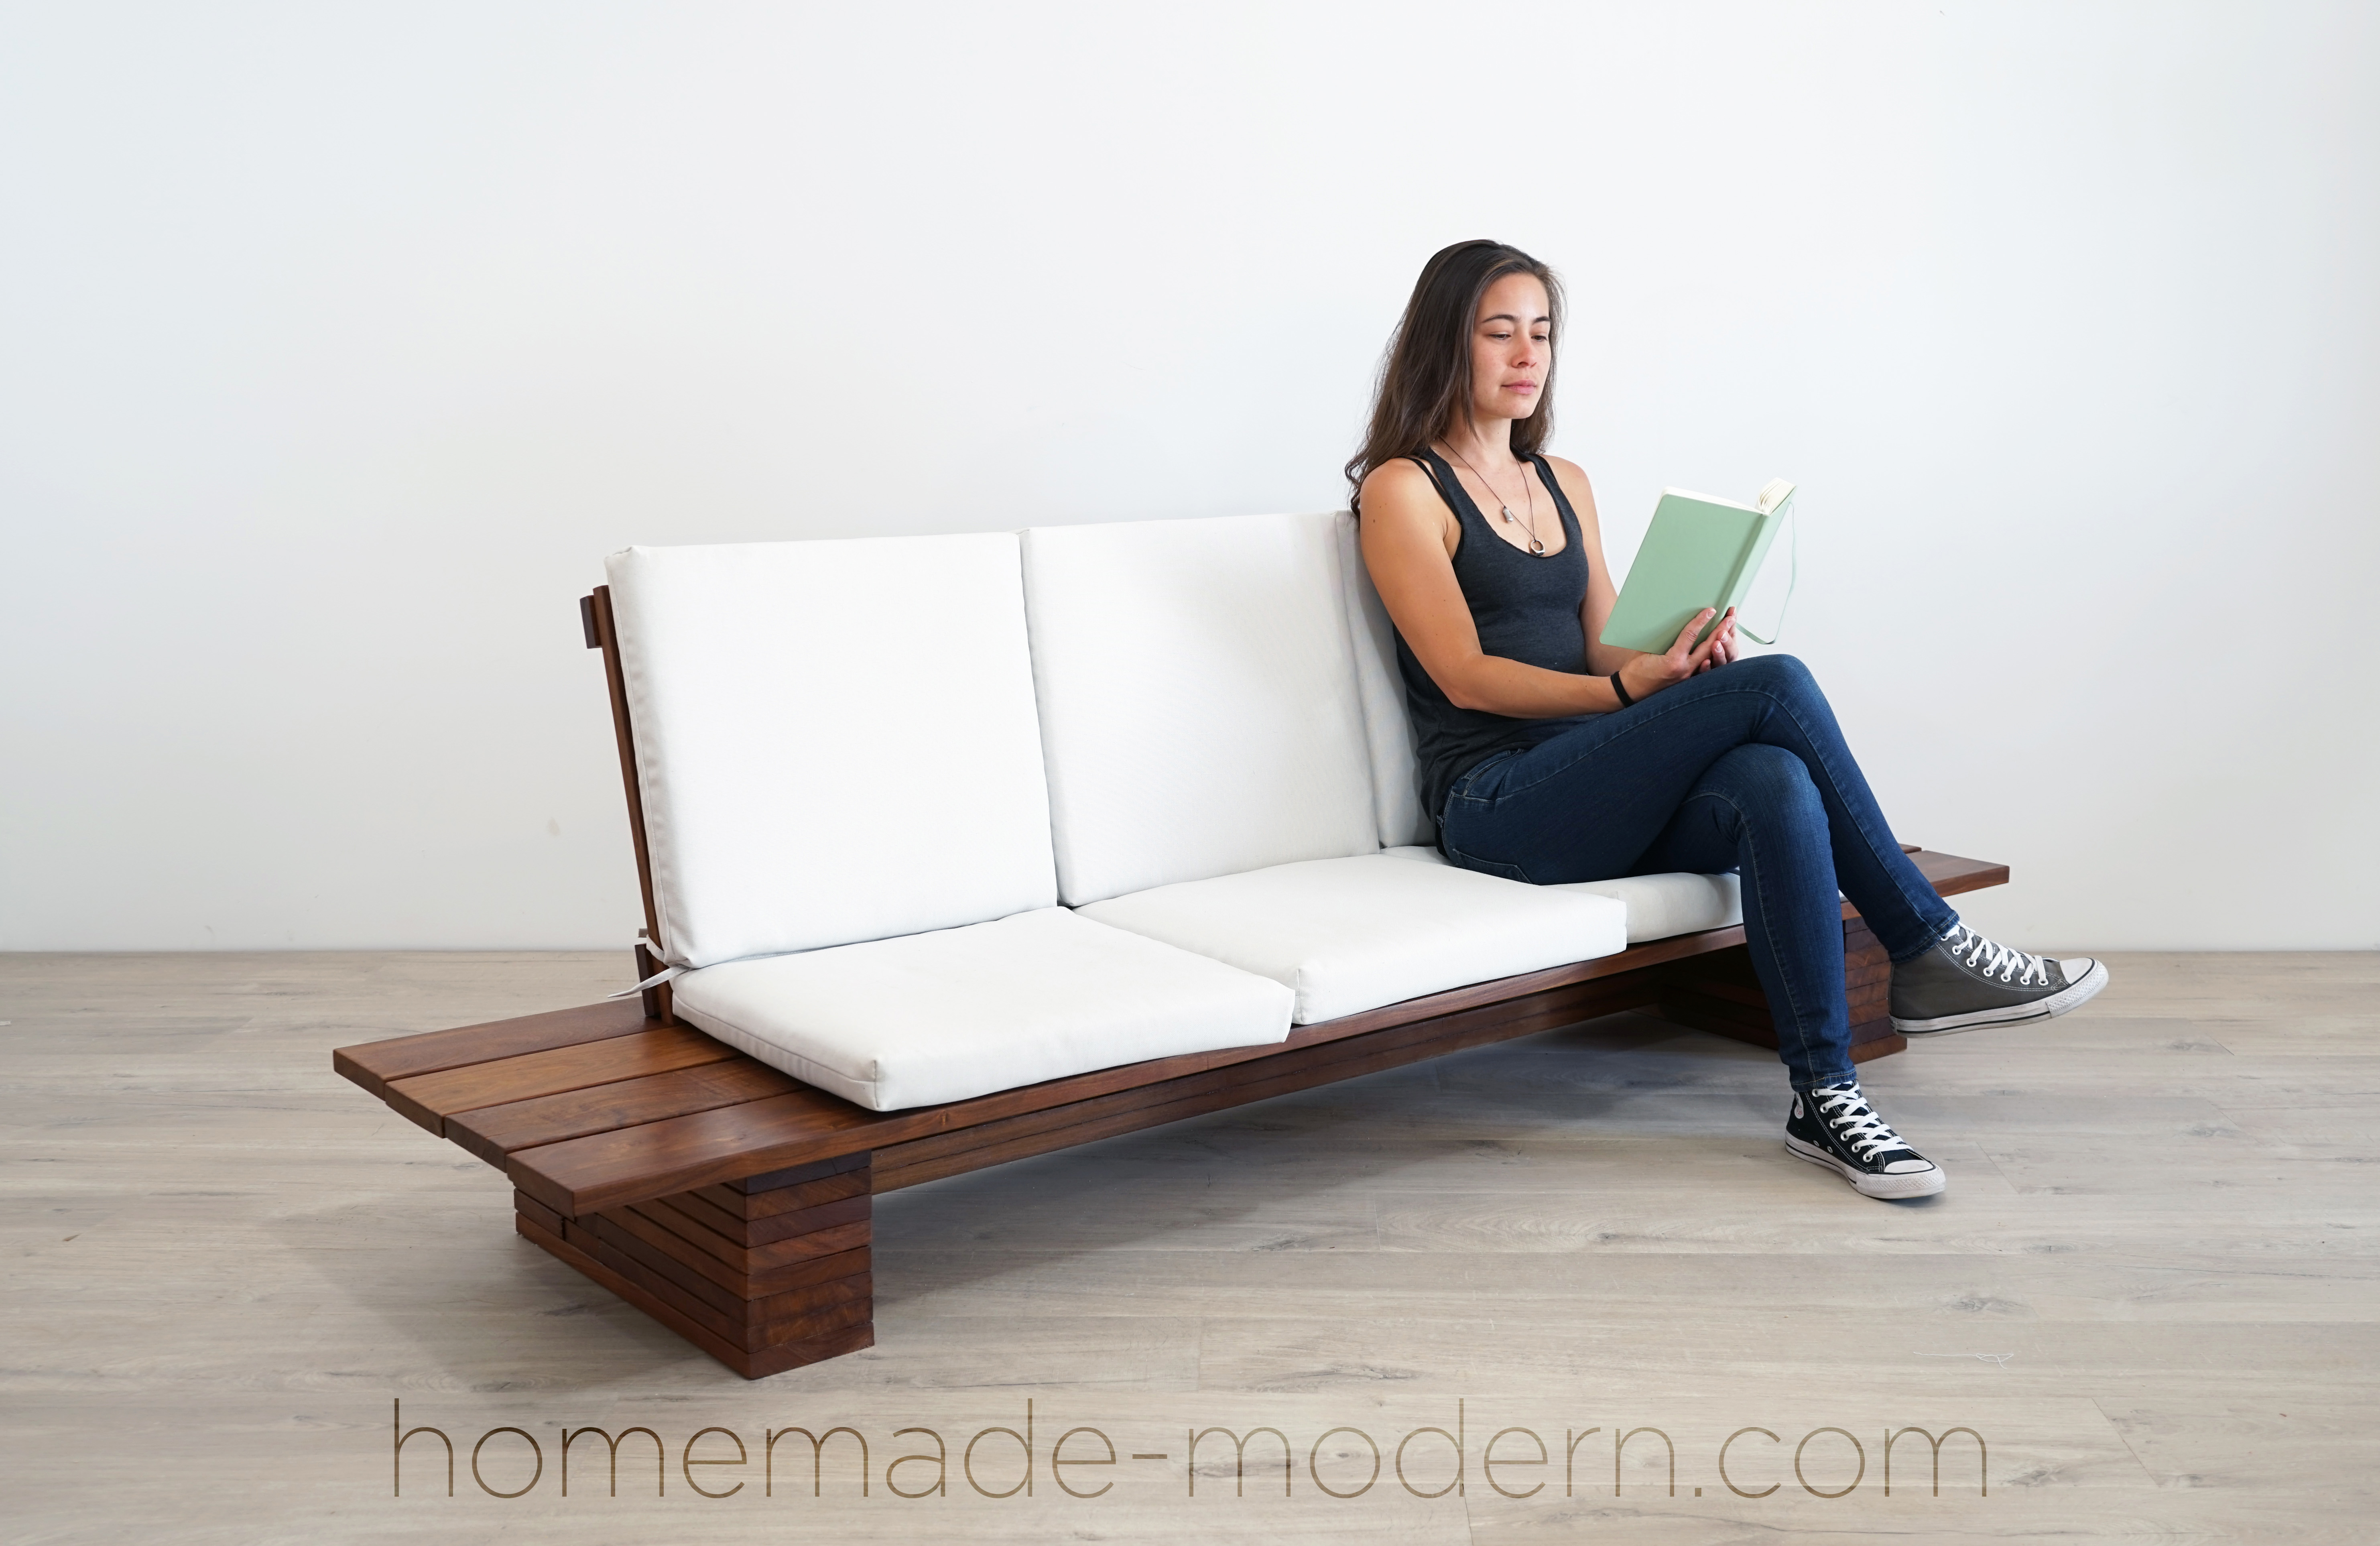 This DIY Outdoor sofa was made out of Cumaru Deck boards and outdoor cushions from Target. For more information go to HomeMade-Modern.com